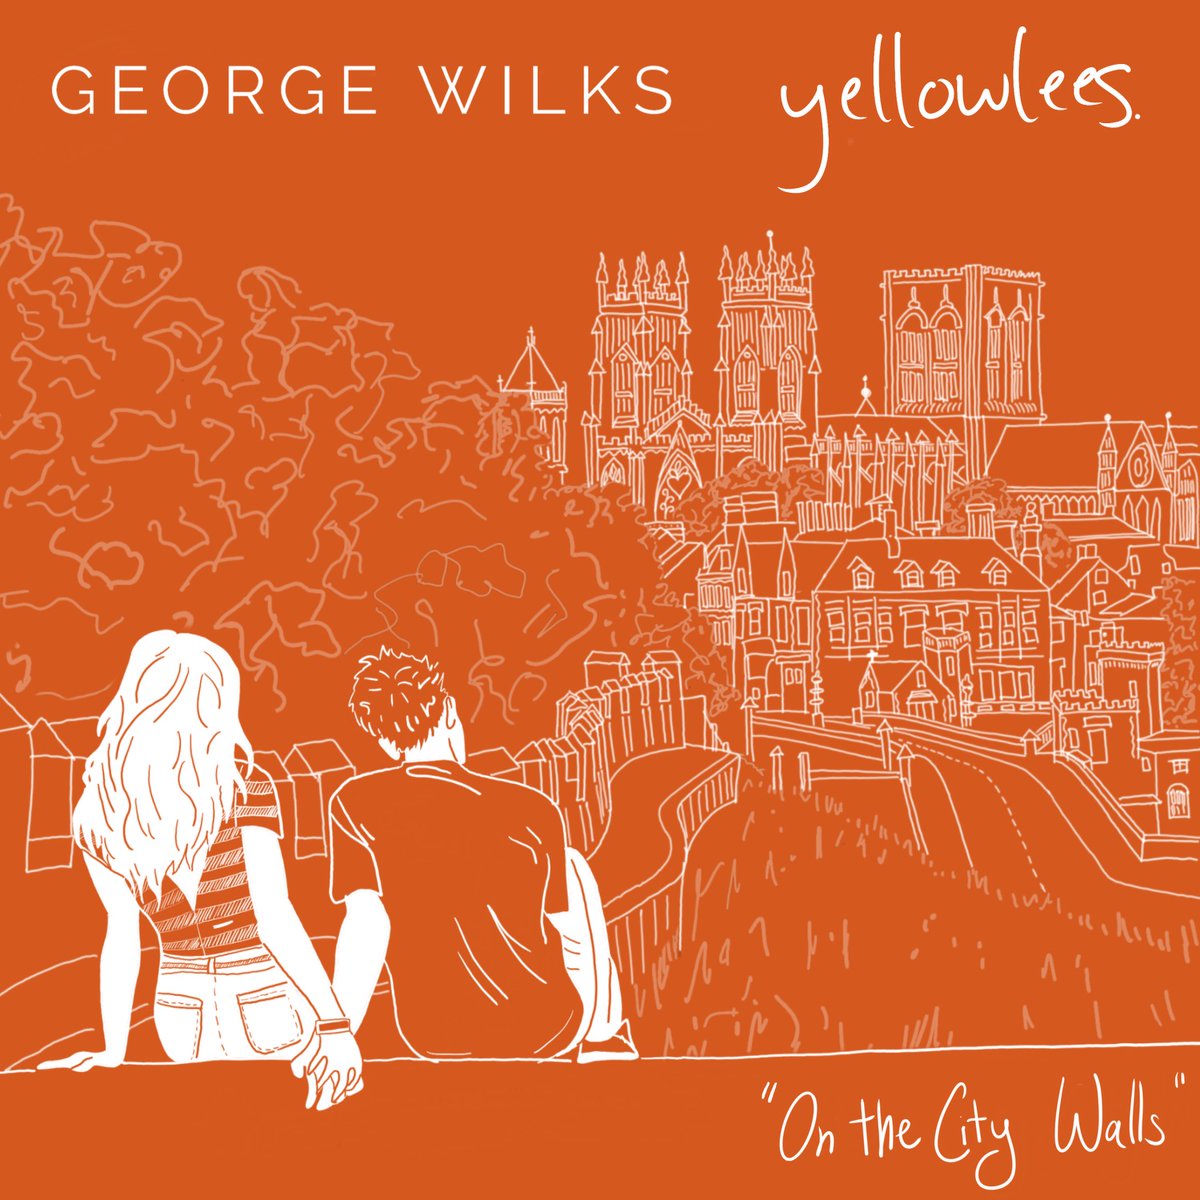 My new single and collaboration with Yellowlees 'On The City Walls' is OUT NOW. Available on all streaming services and @Bandcamp ! Links below ⬇️ Enjoy x Bandcamp: georgewilks.bandcamp.com/album/on-the-c… Spotify: open.spotify.com/album/4zVr1c2F… Apple Music: music.apple.com/gb/album/on-th…